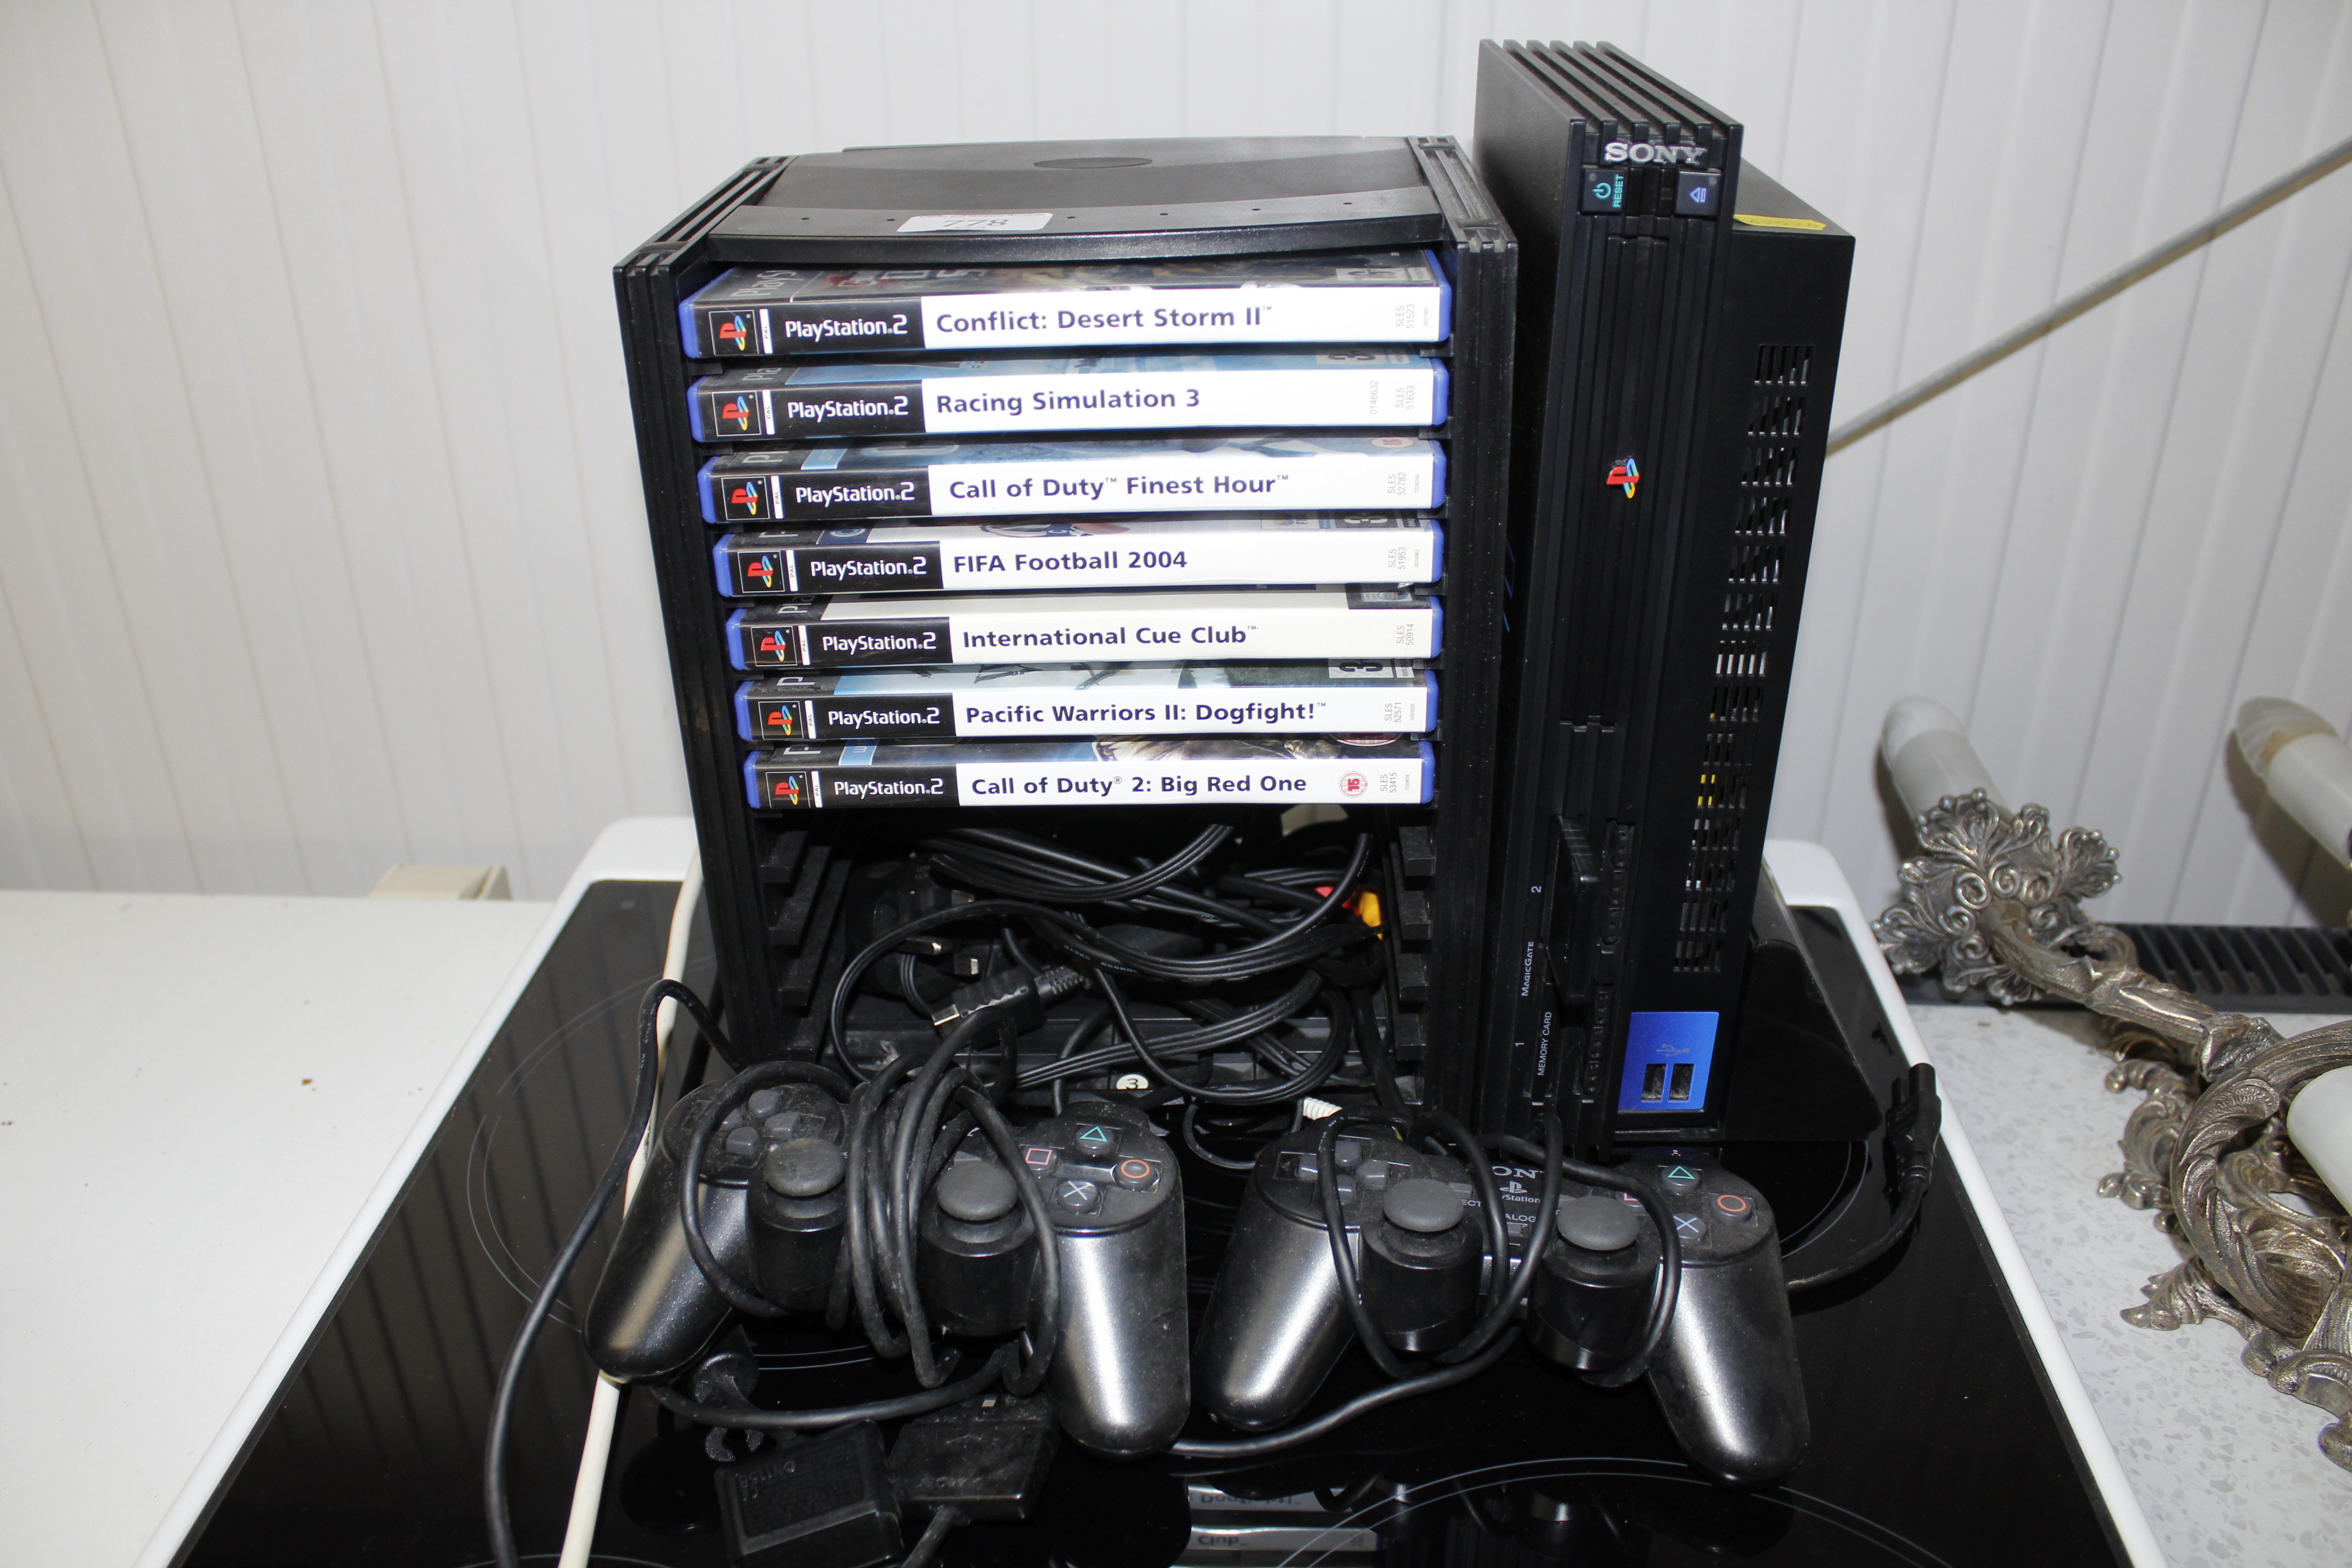 A PlayStation 2 with stand, remote controls and va